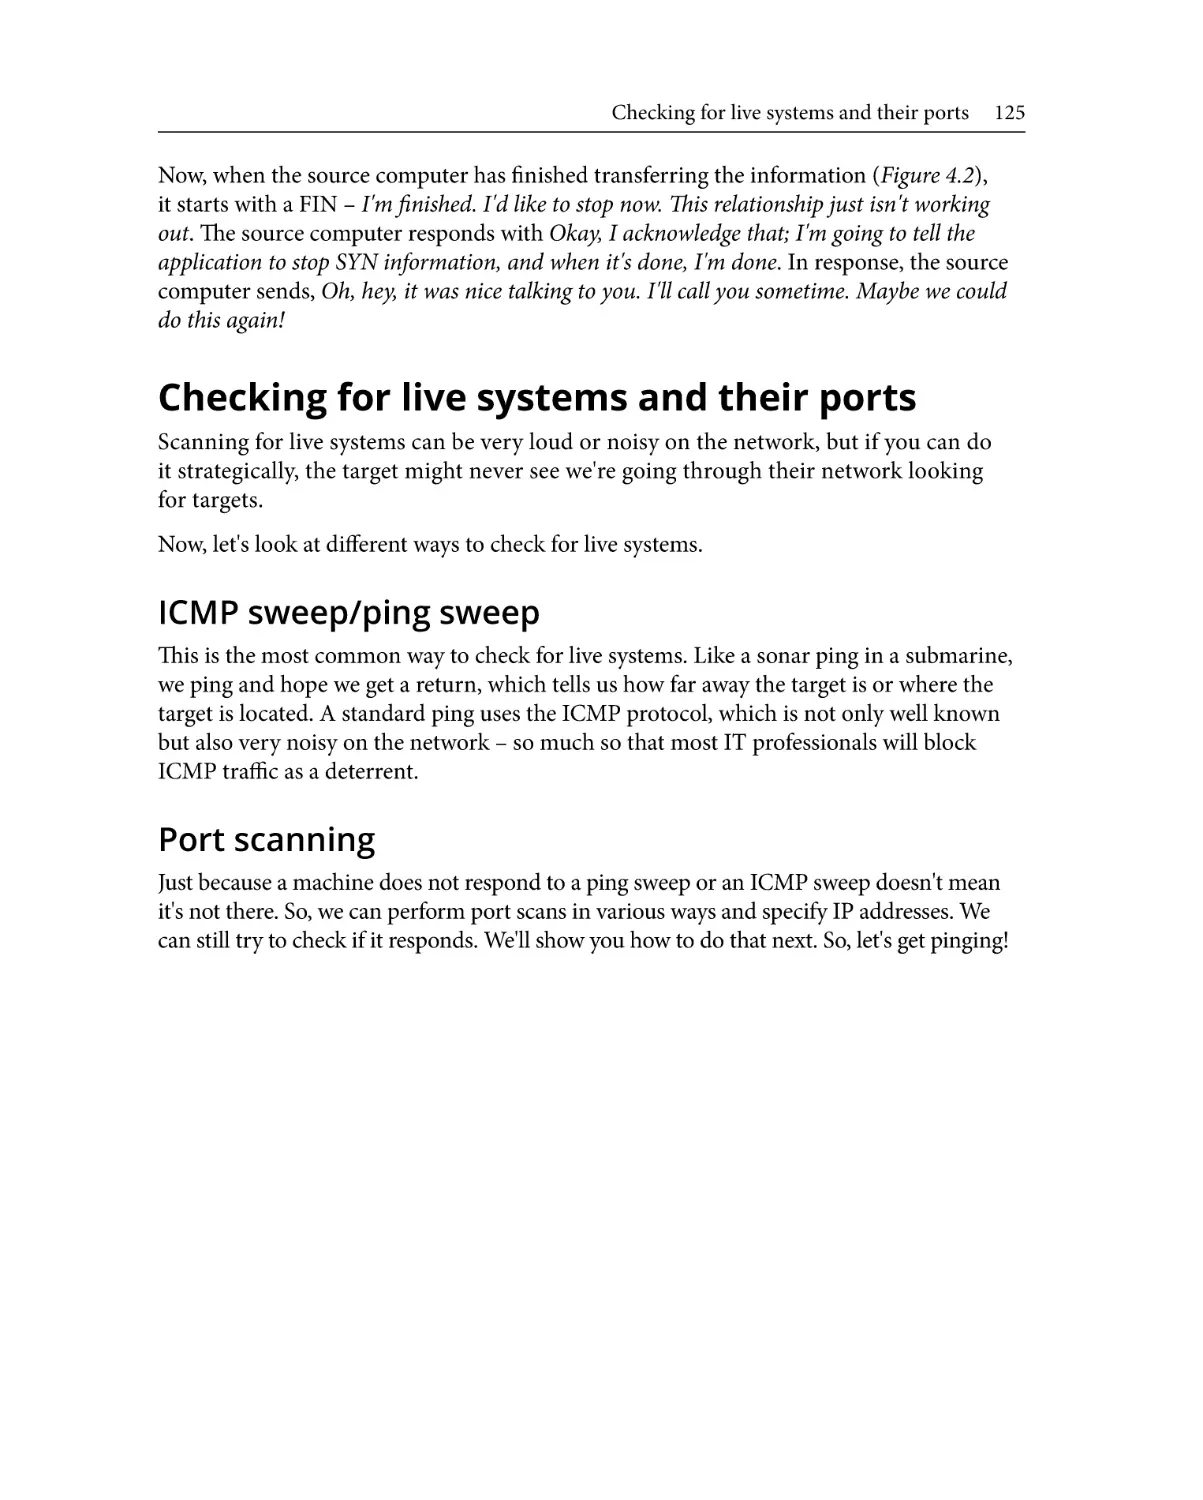 Checking for live systems and their ports
ICMP sweep/ping sweep
Port scanning